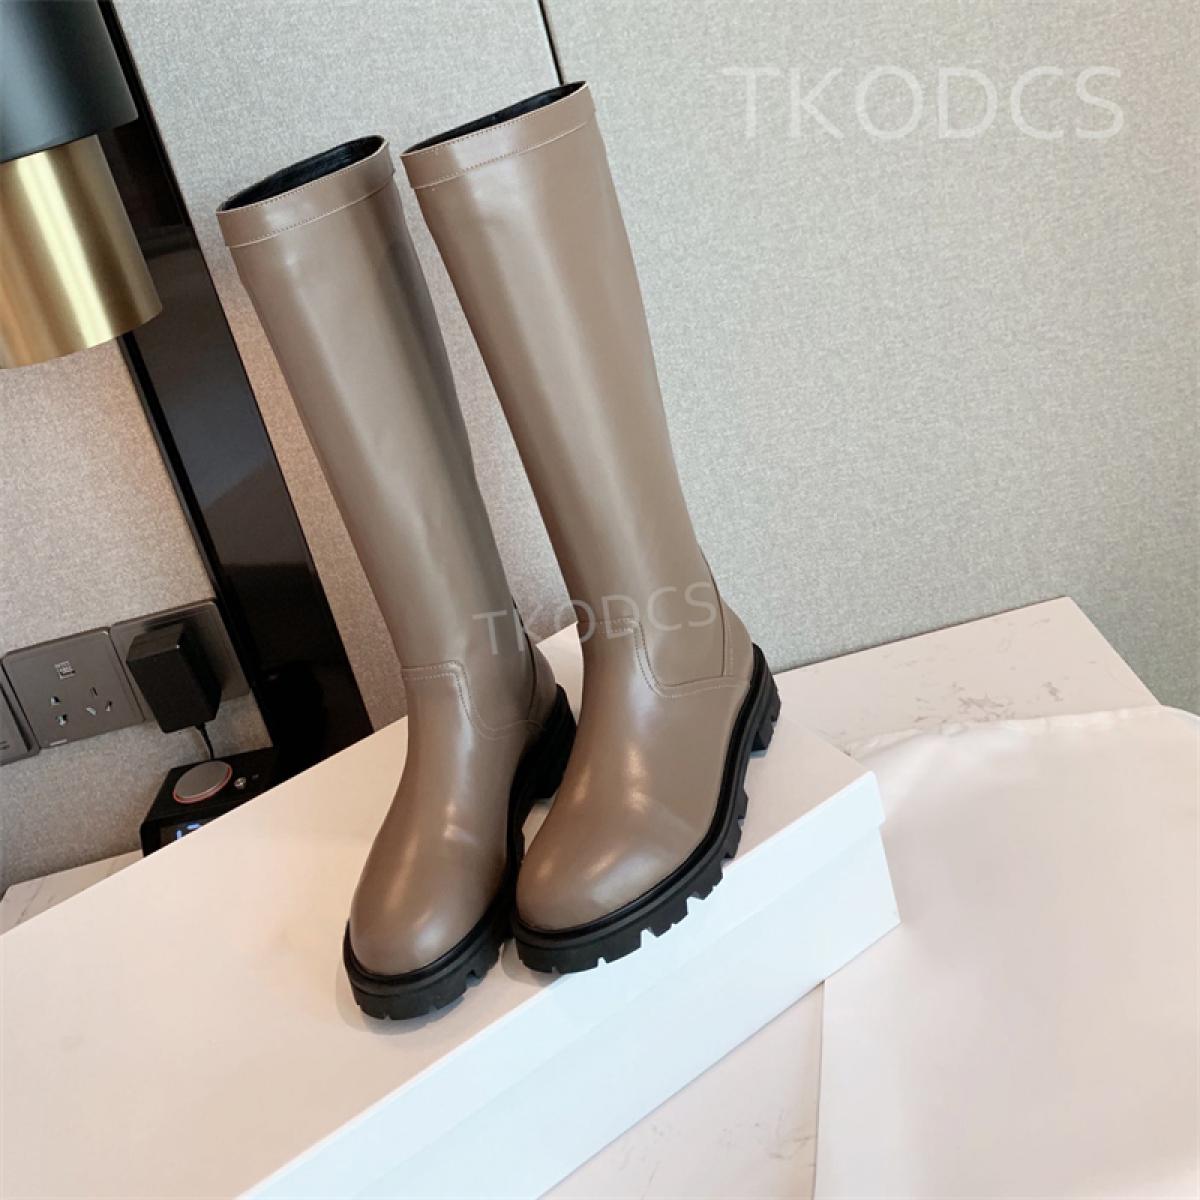 Women Long Boots Genuine Leather Ladies Classic Boots Women Platform Knee High Boots Round Toe Basic Boots Fashion Knigh